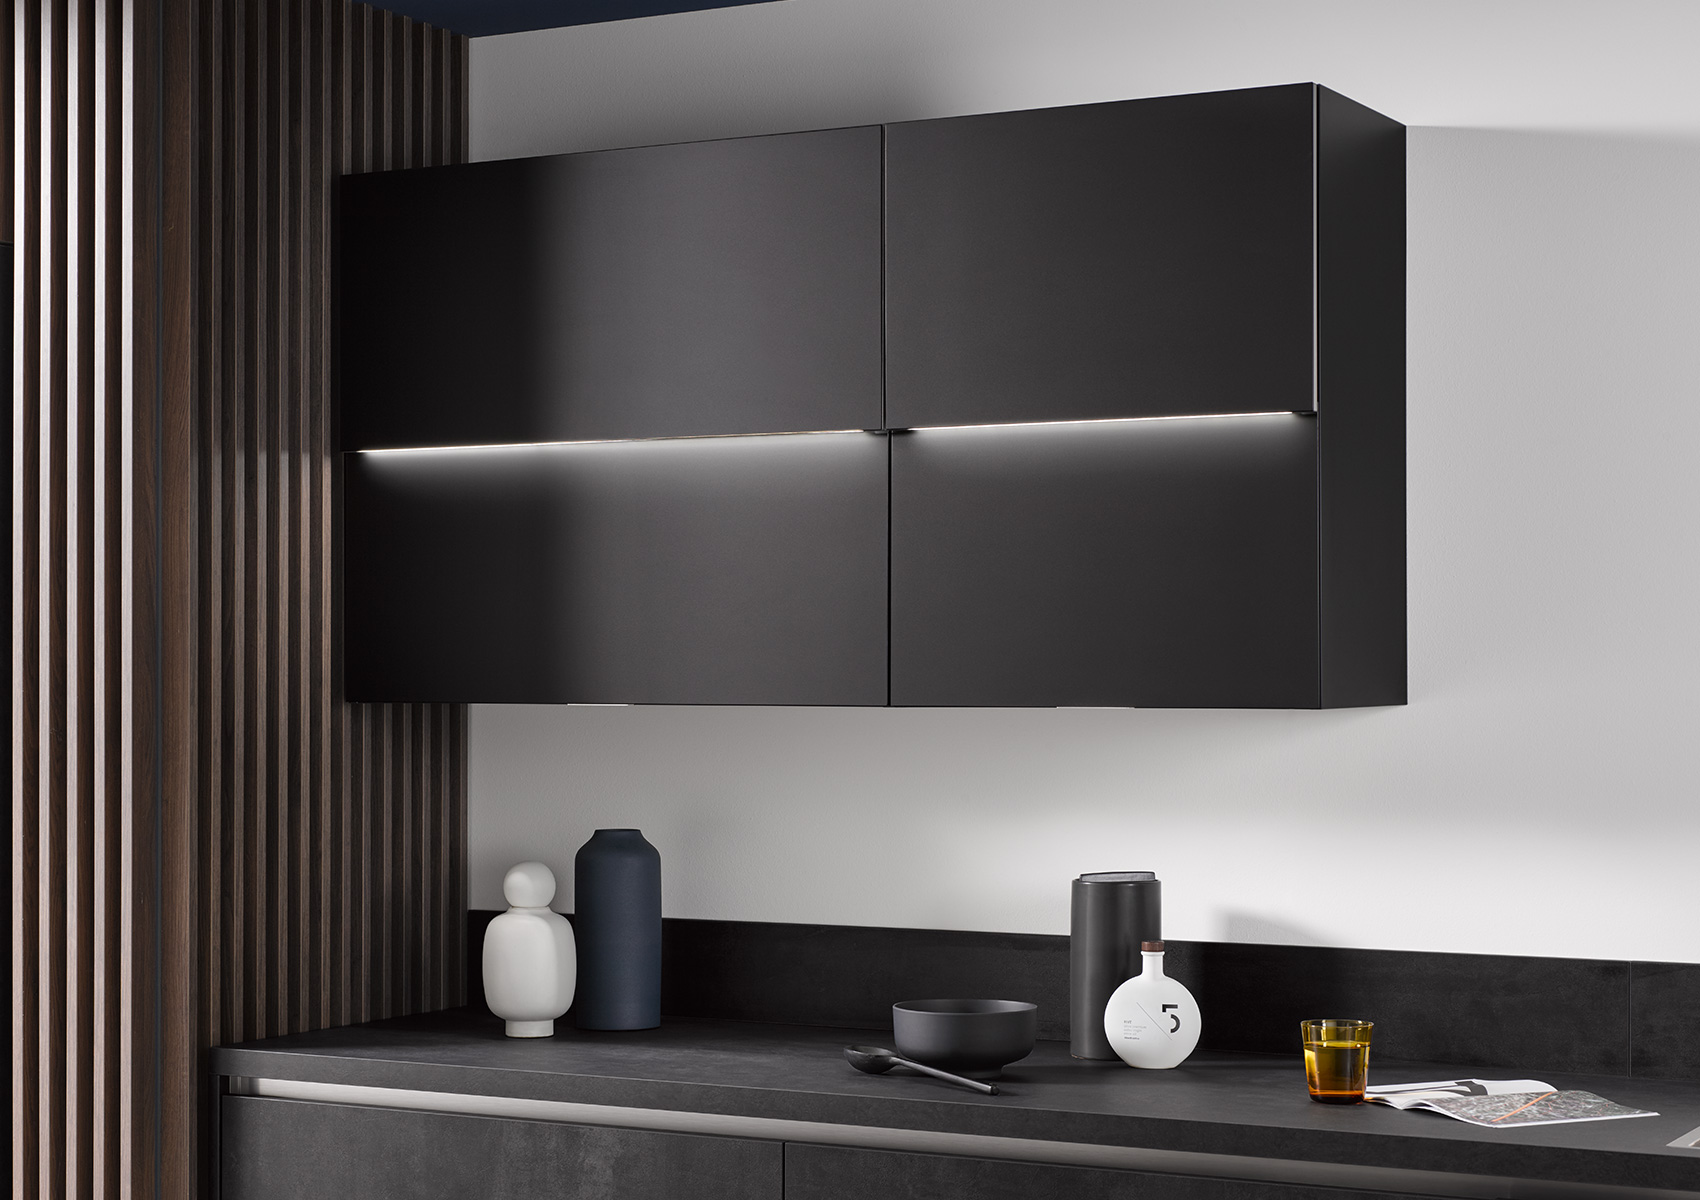 Three views of the black SlightLift wall units with LEDs